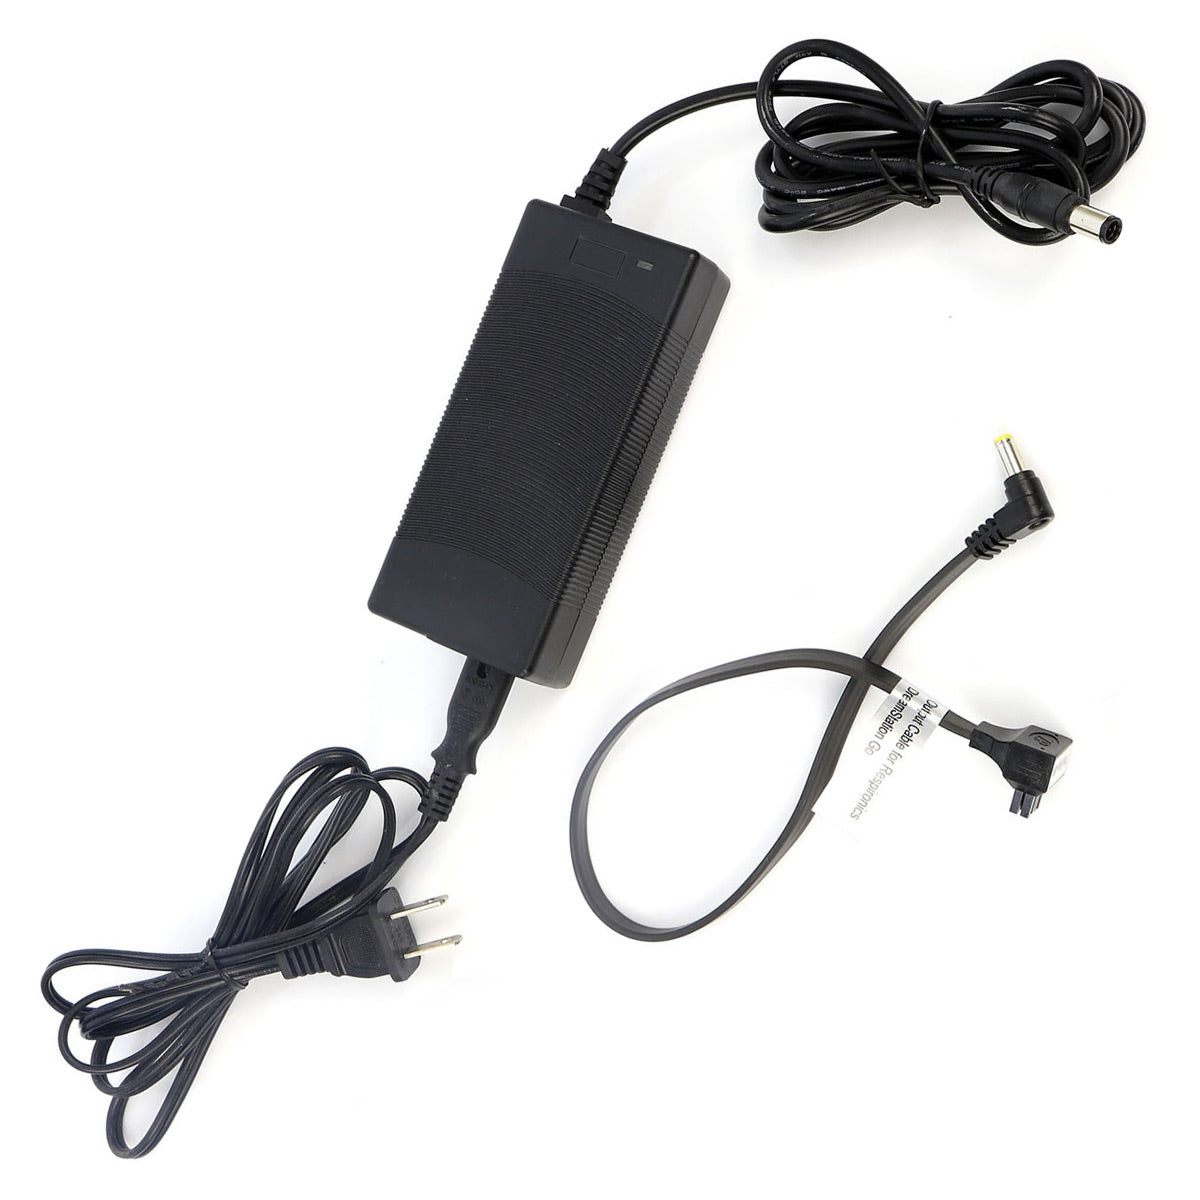 Luna II & DreamStation GO Adapter Cables for Pilot 24 Lite CPAP Battery Packs